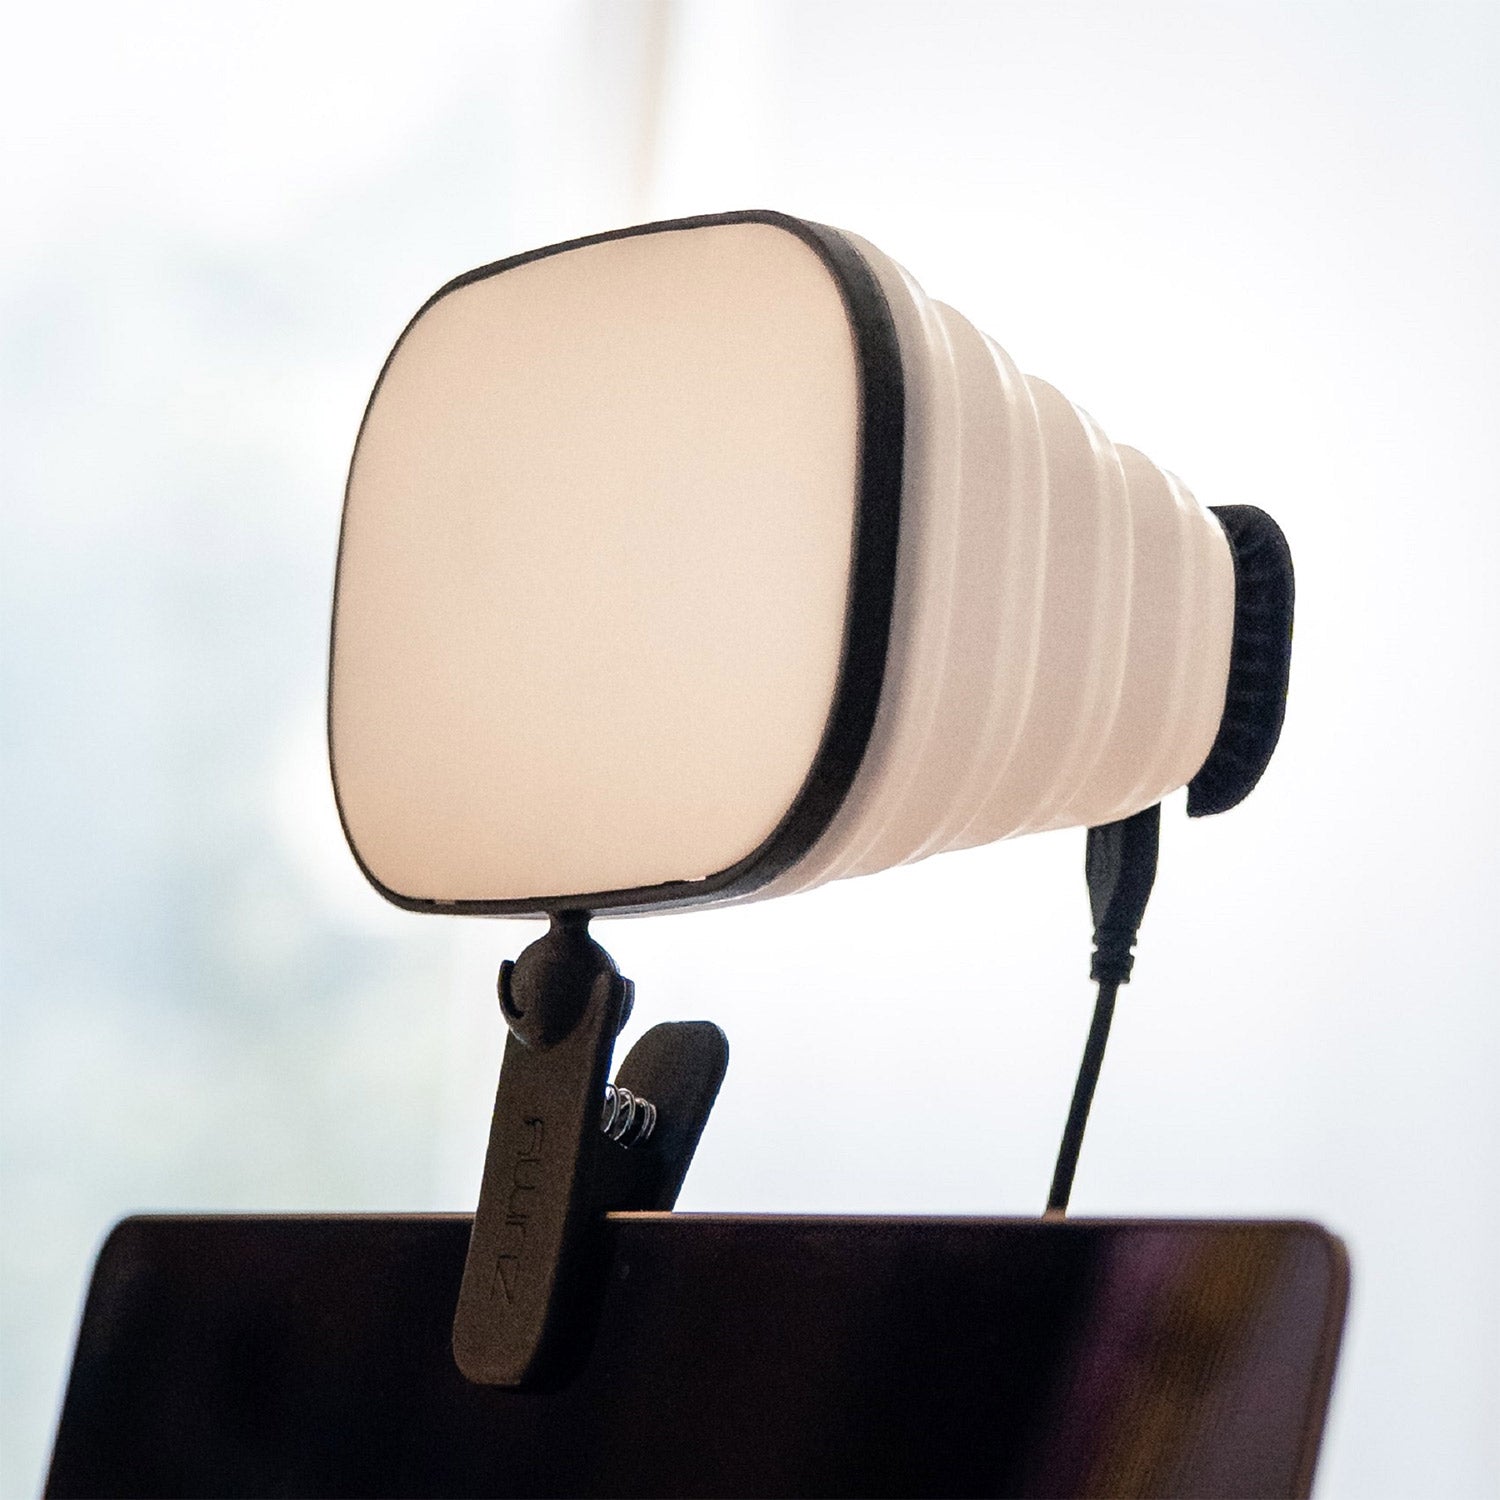 Zumy Portable Light for Video Meetings